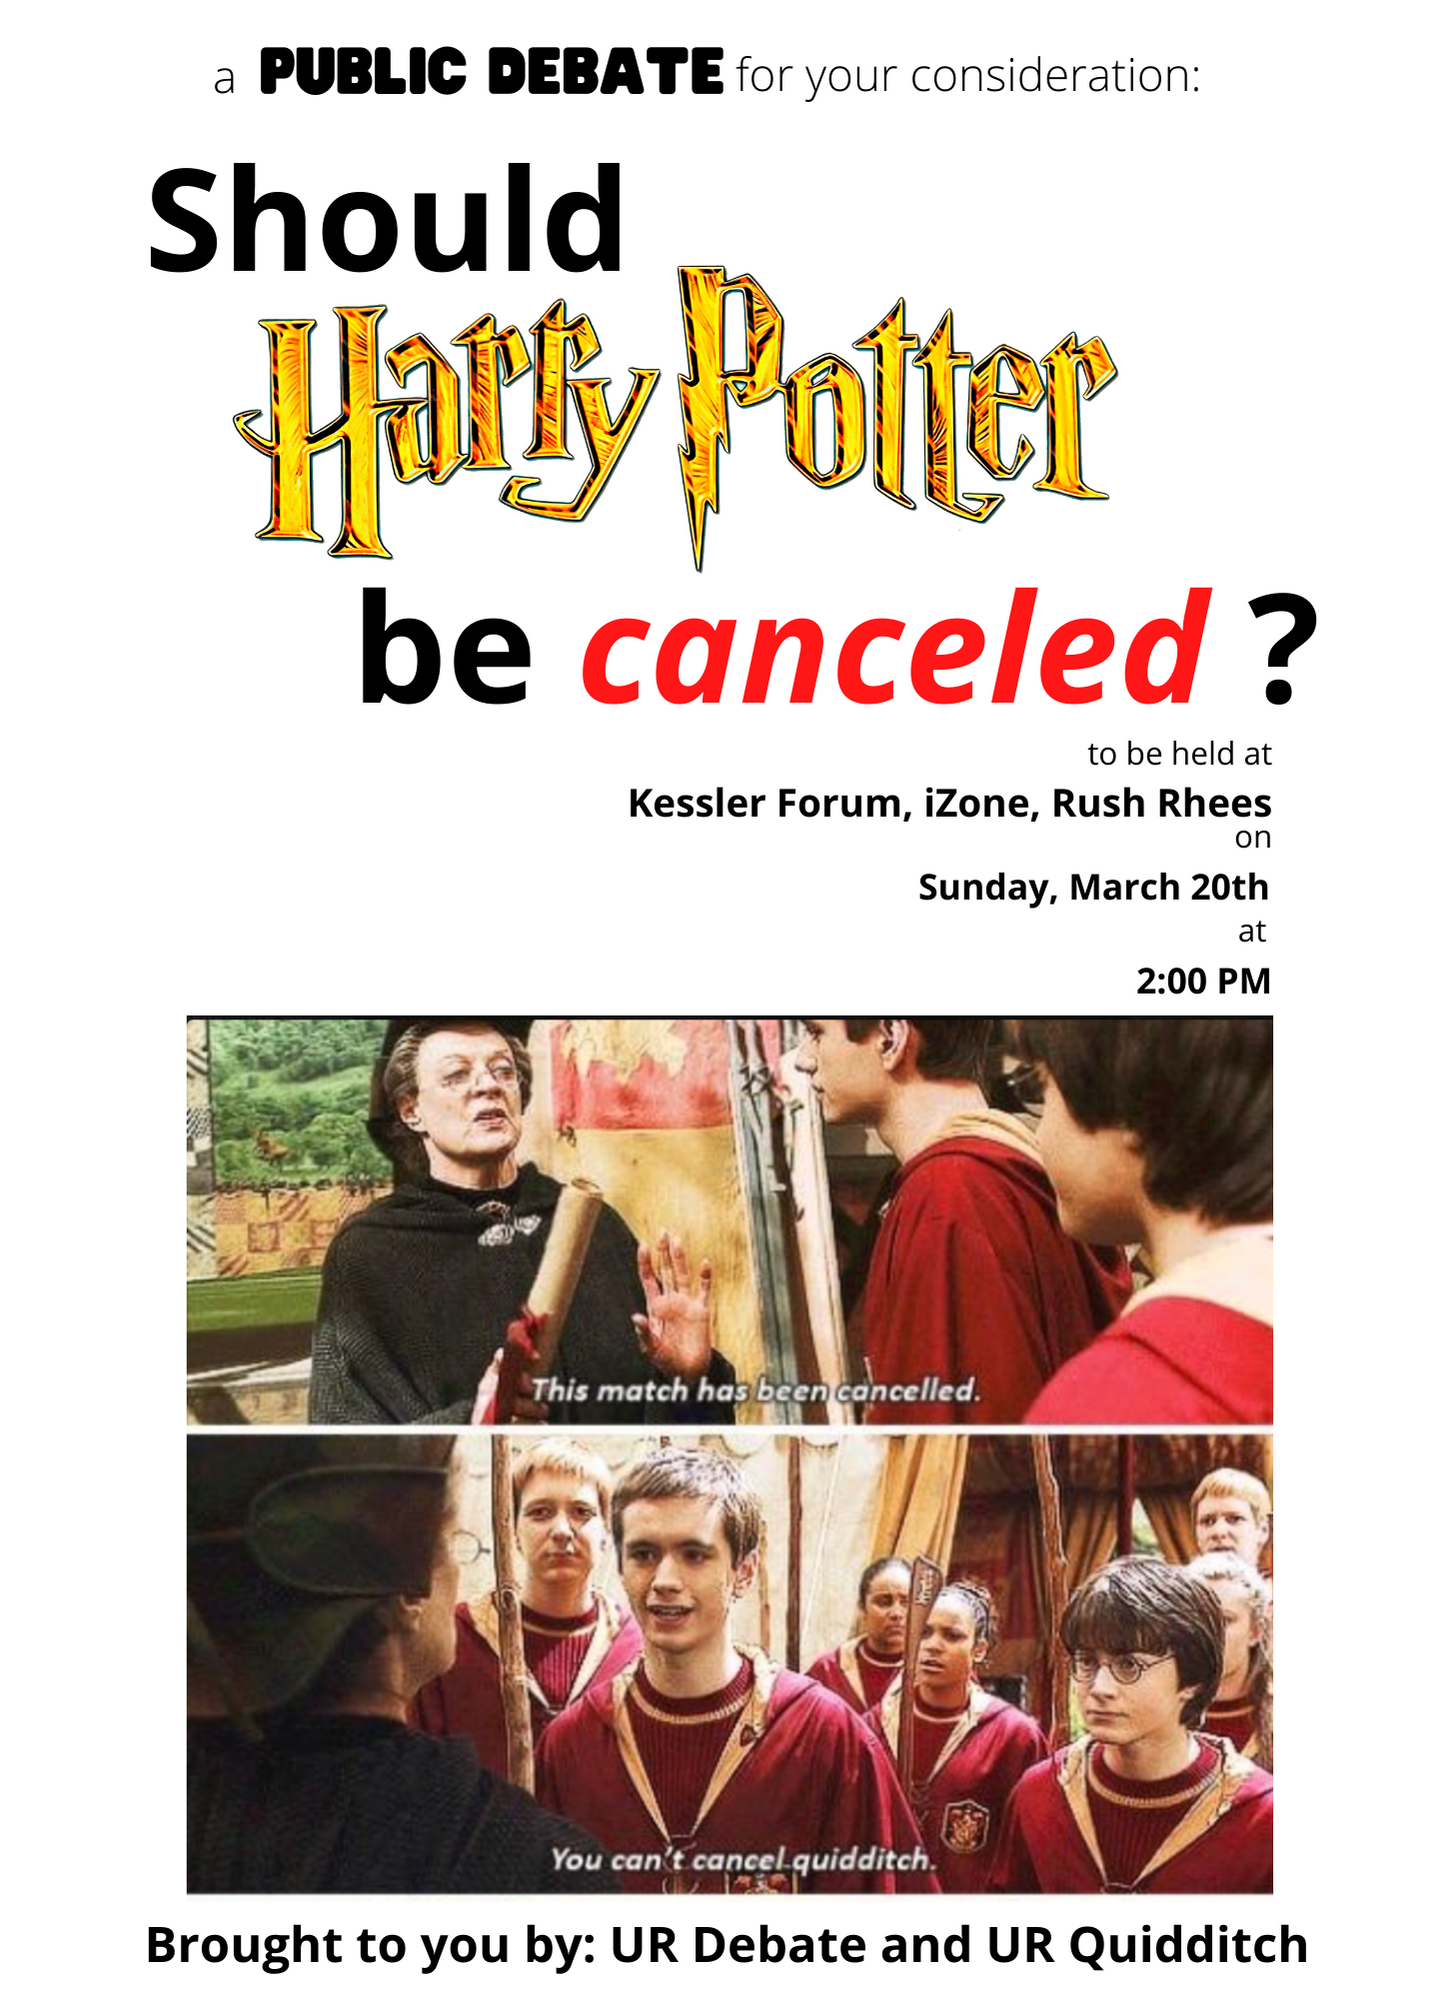 public-debate-should-harry-potter-be-canceled-8--11-in.png